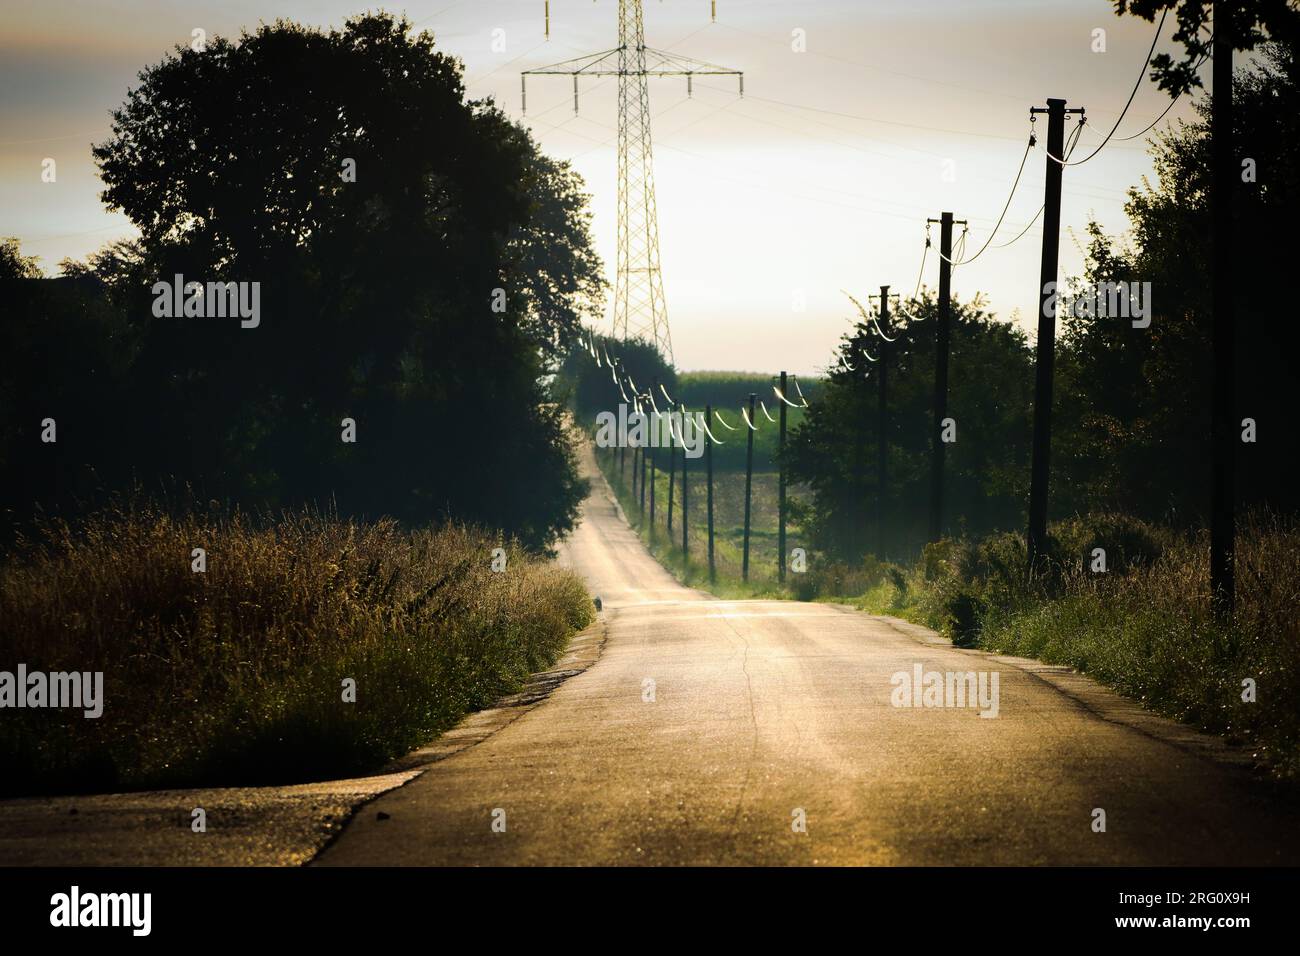 lonely road in natural landscape with power poles Stock Photo